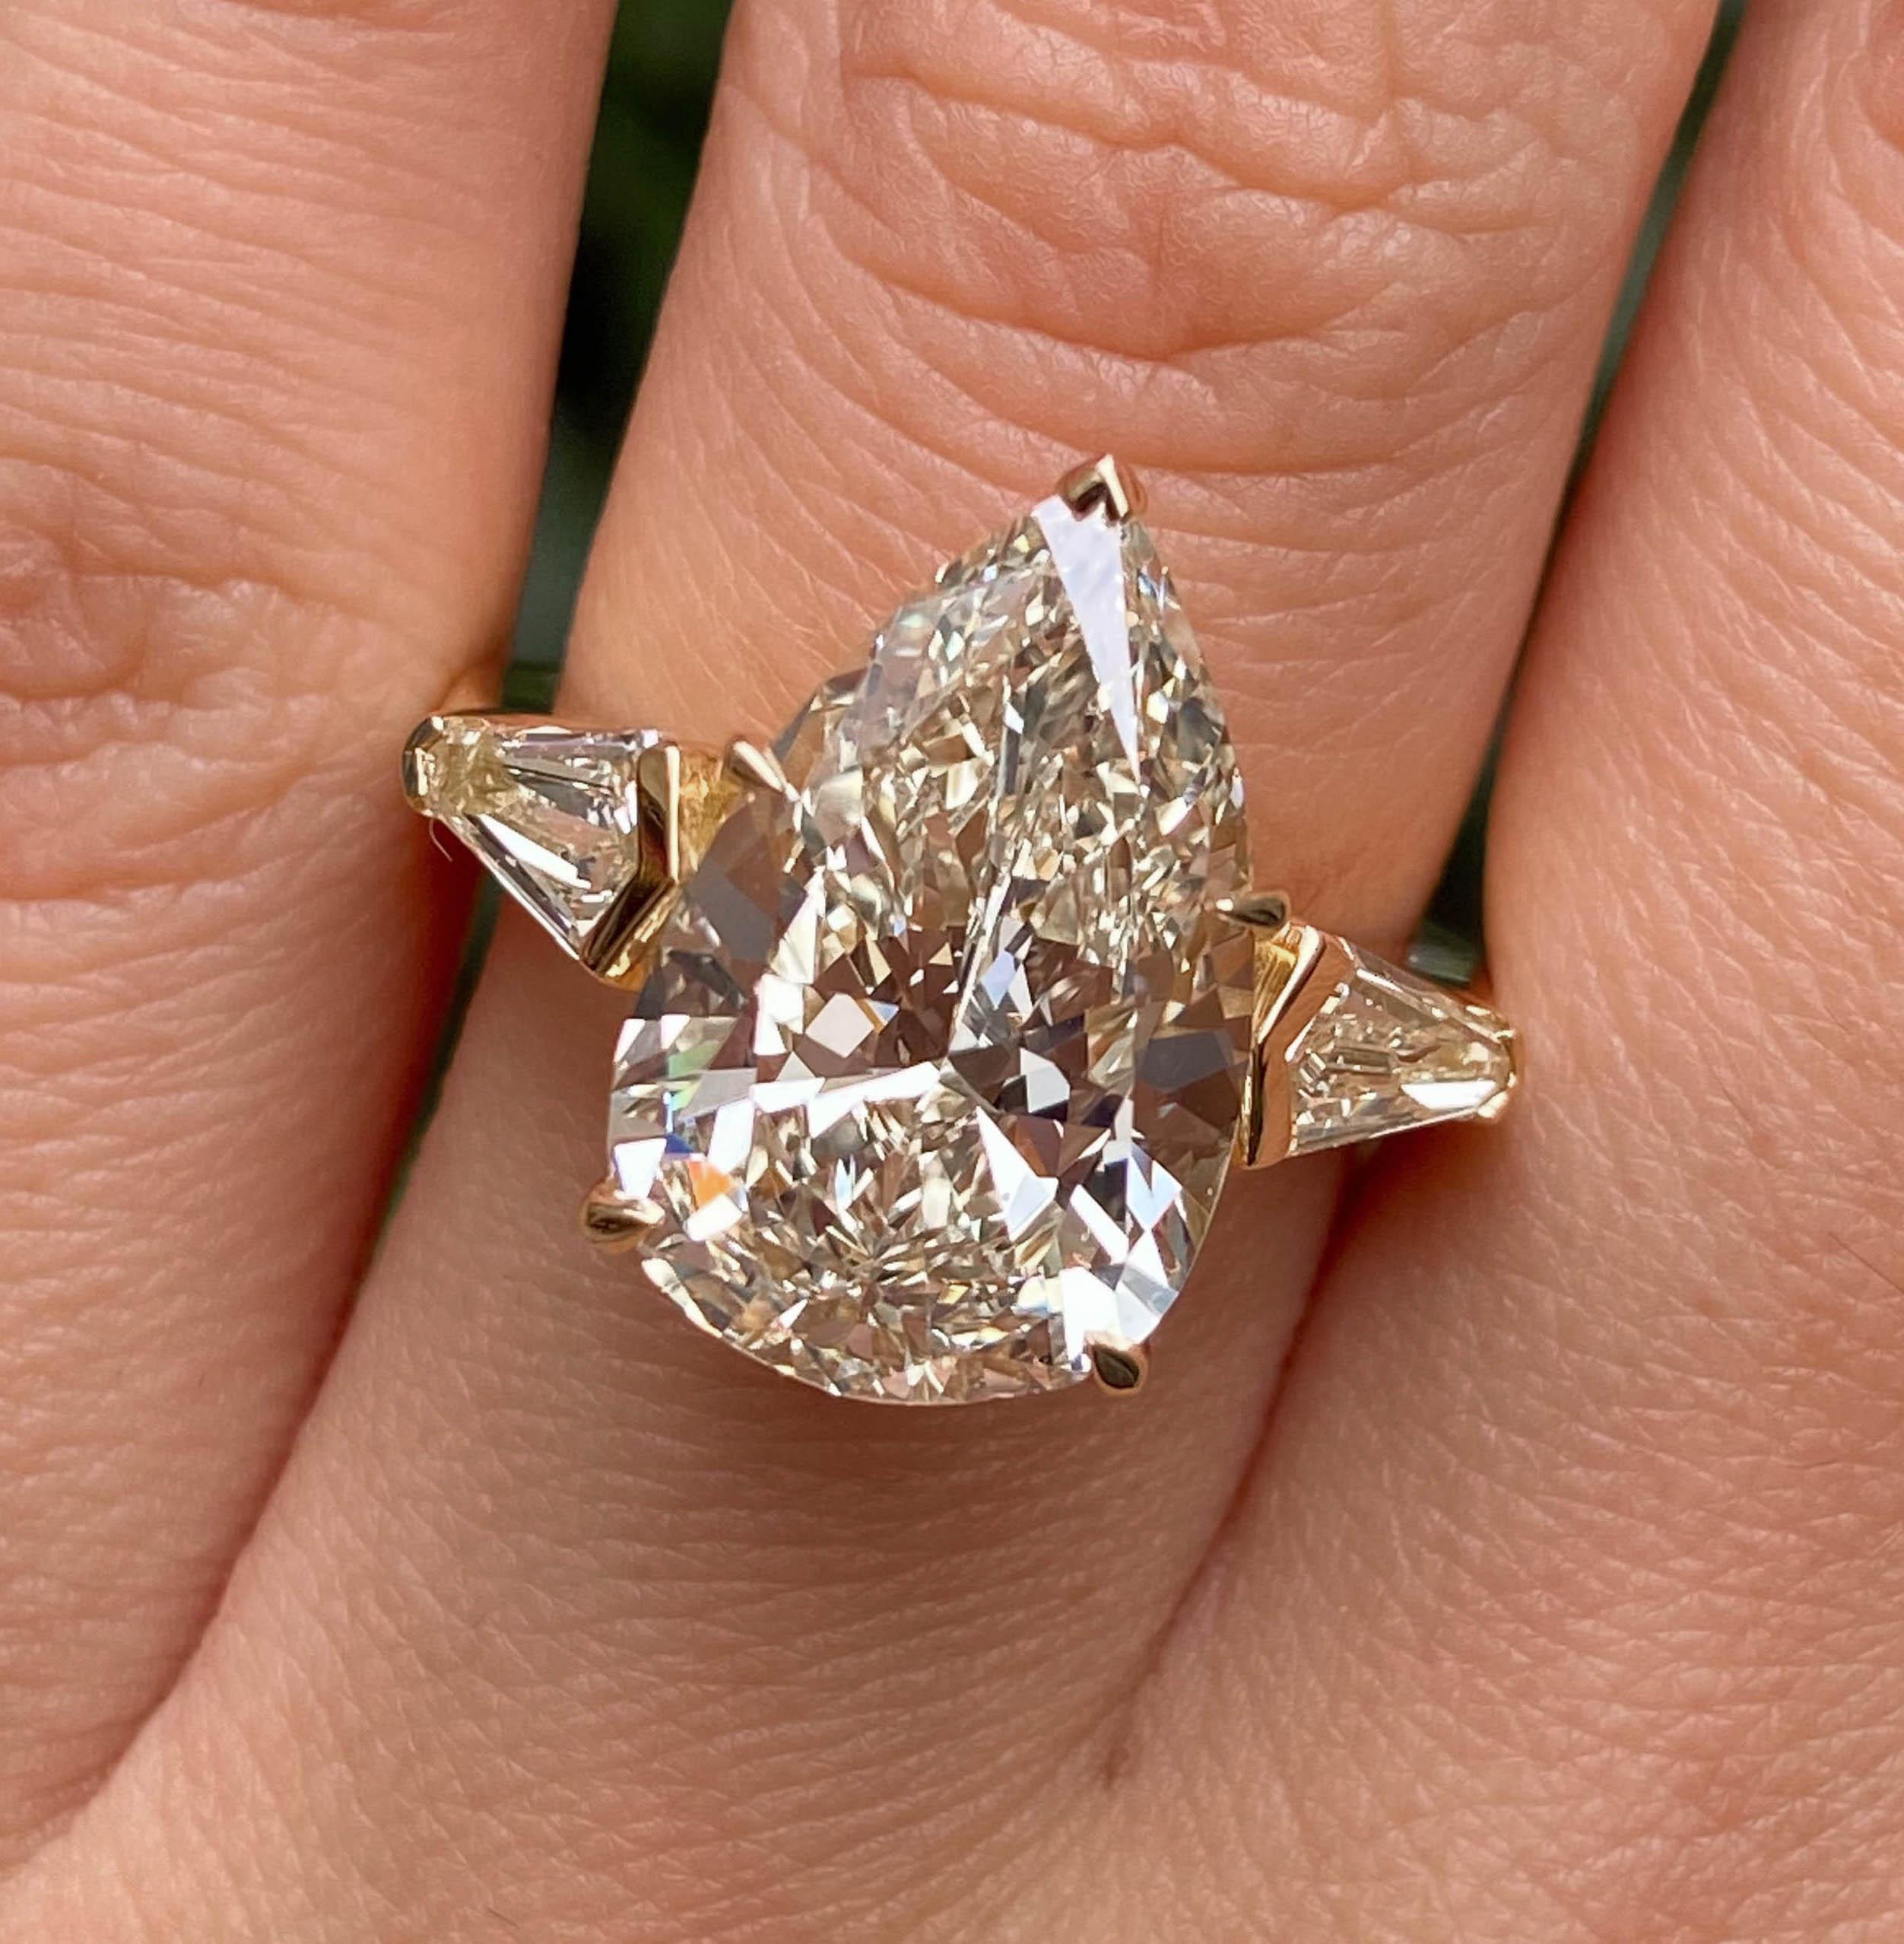 A Breathtaking Estate Vintage HANDMADE Three-stone 18k Yellow Gold (stamped) Engagement ring dazzles GIA certified 4.92ct Pear Shaped Diamond center diamond in O-P color and VS2 clarity; with measurements of 15.35x9.82x5.67mm. GIA report #